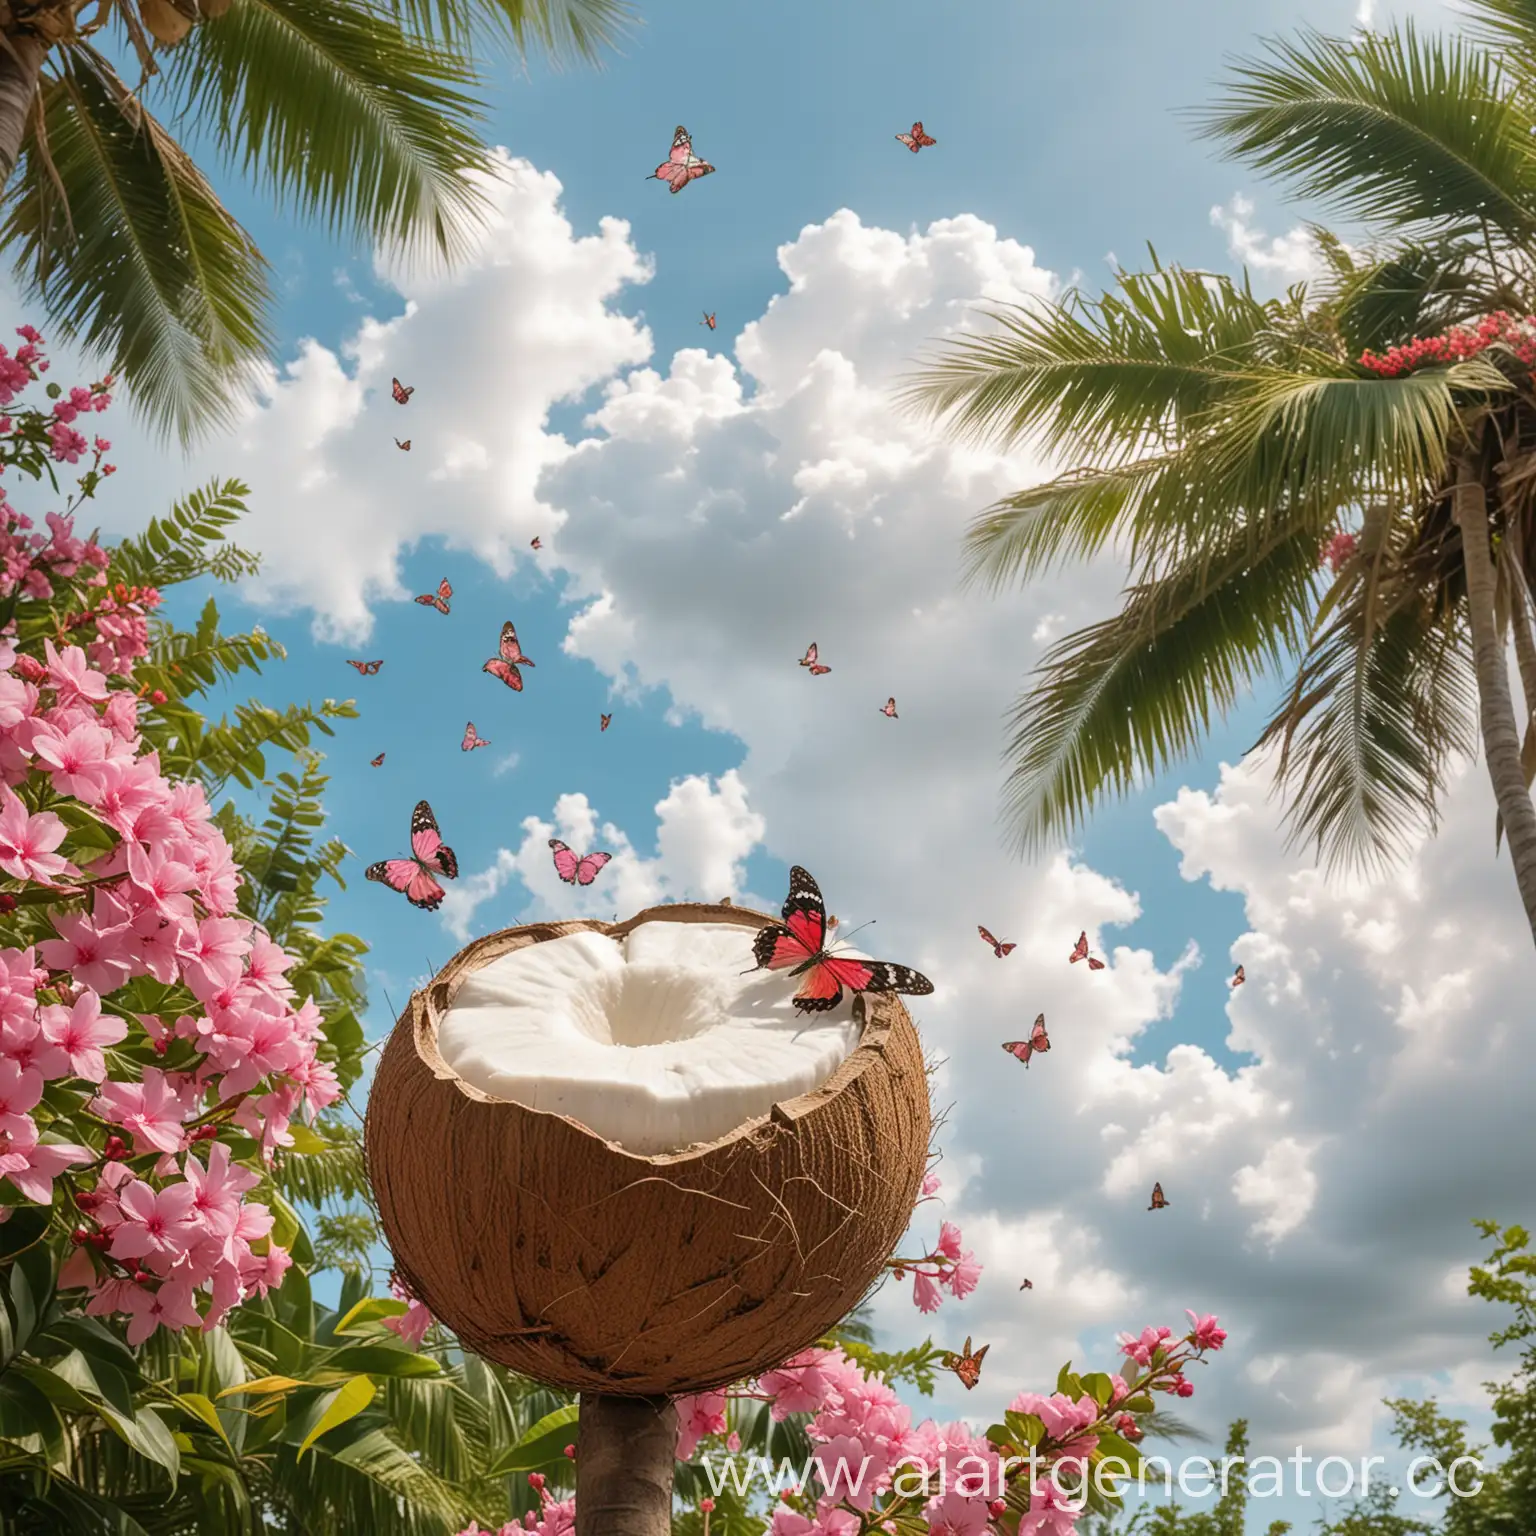 Tranquil-Scene-of-a-Coconut-Tree-with-Pink-Flowers-and-Butterflies